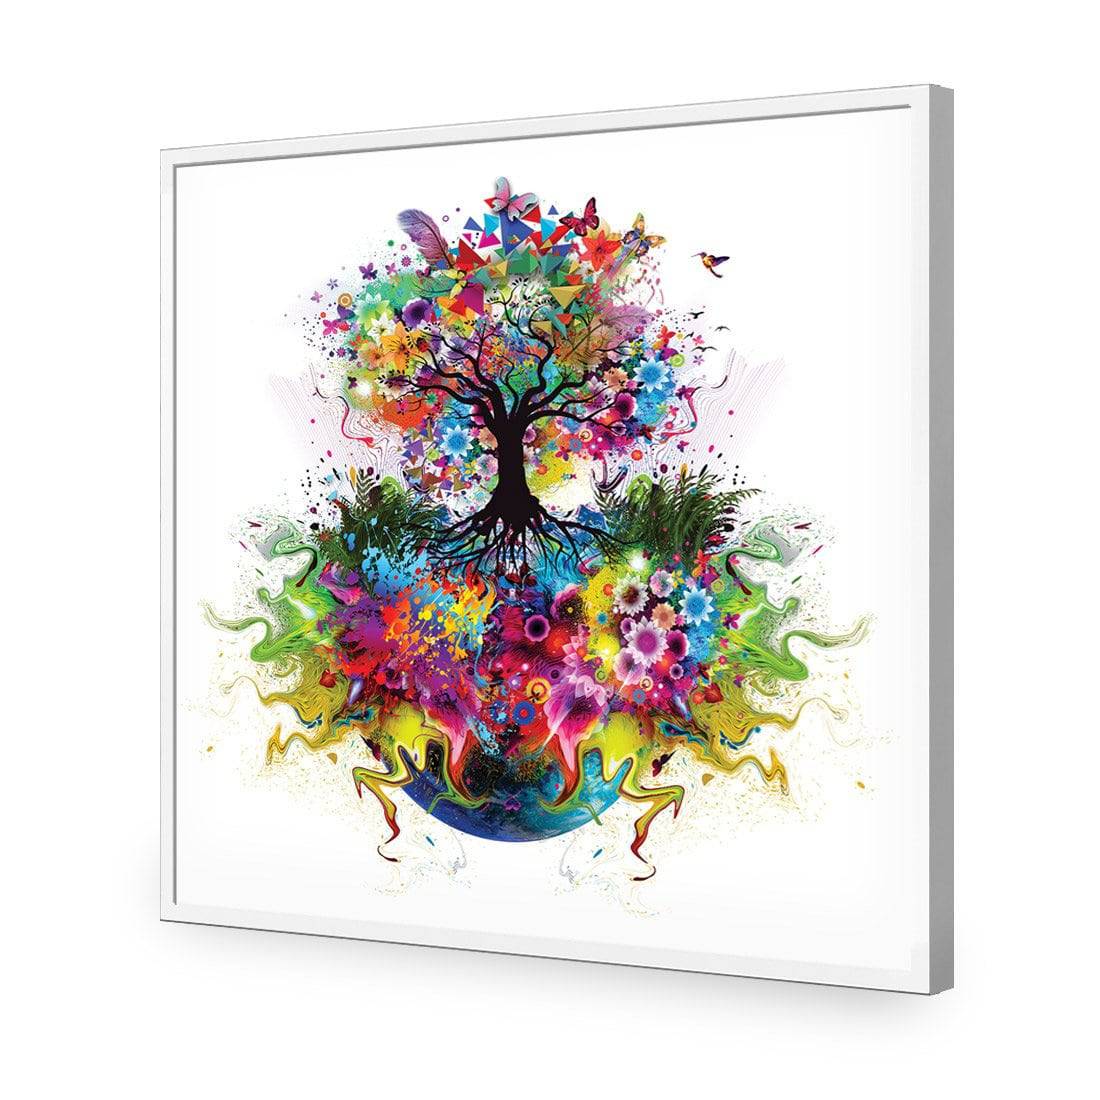 Flower Power, Square-Acrylic-Wall Art Design-Without Border-Acrylic - White Frame-37x37cm-Wall Art Designs